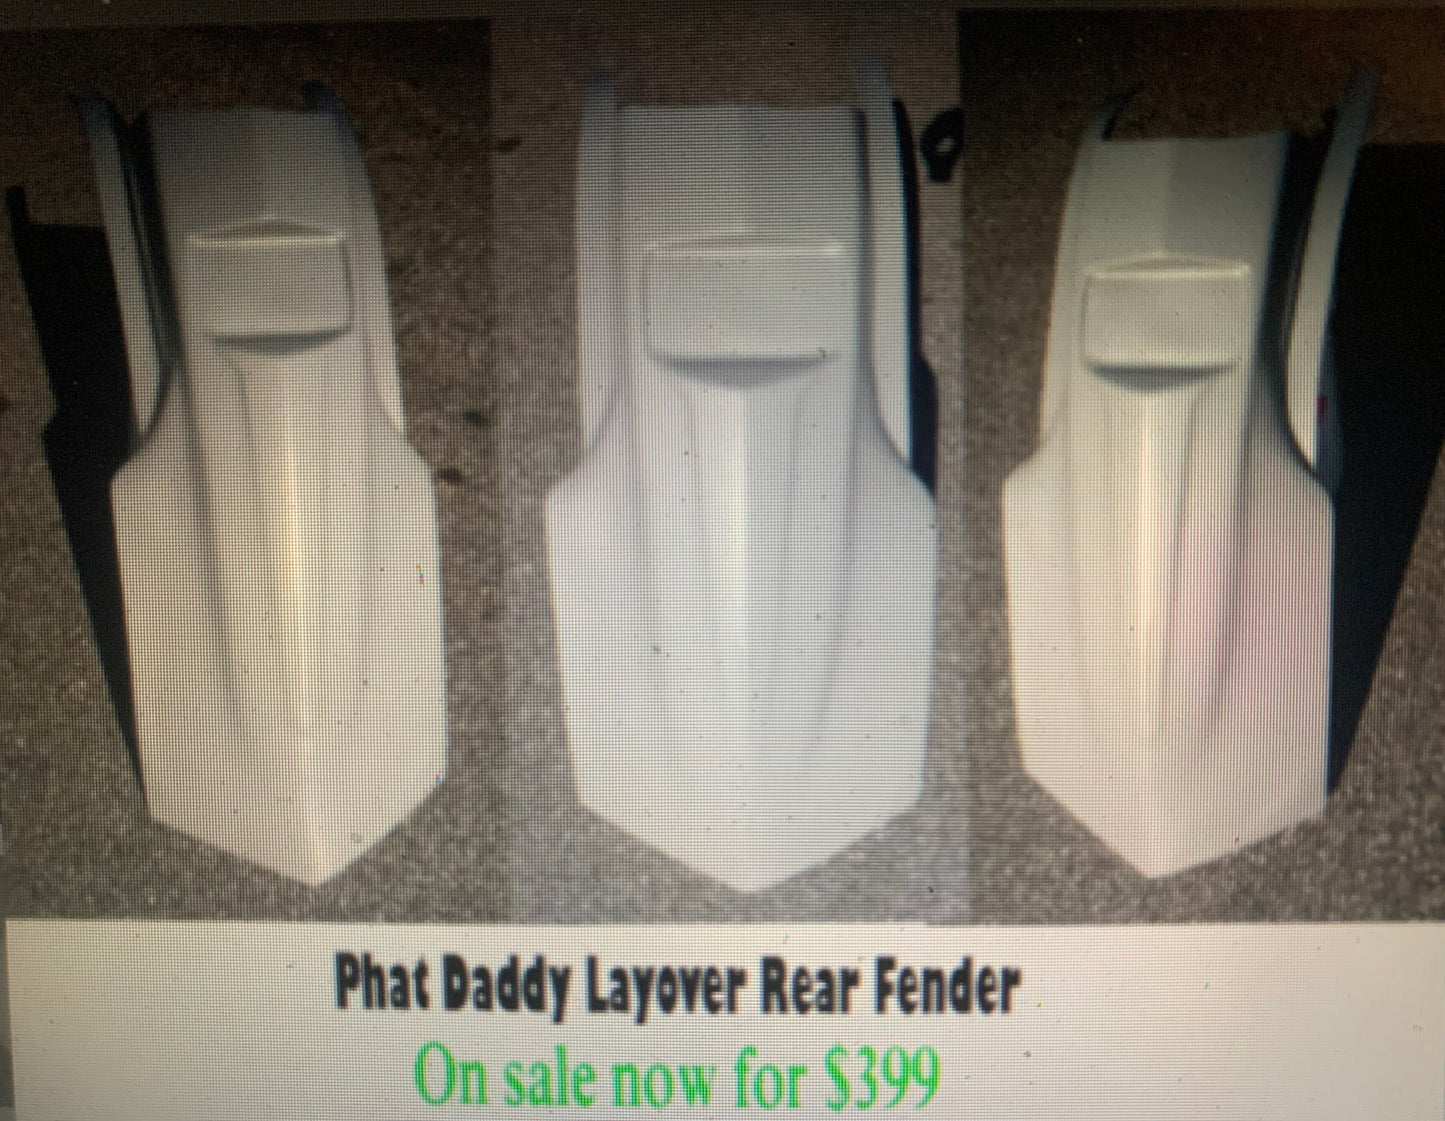 Victory Rear Fender - The "Phat Daddy" Rear Fender fits All Years Cross Country / Cross Roads